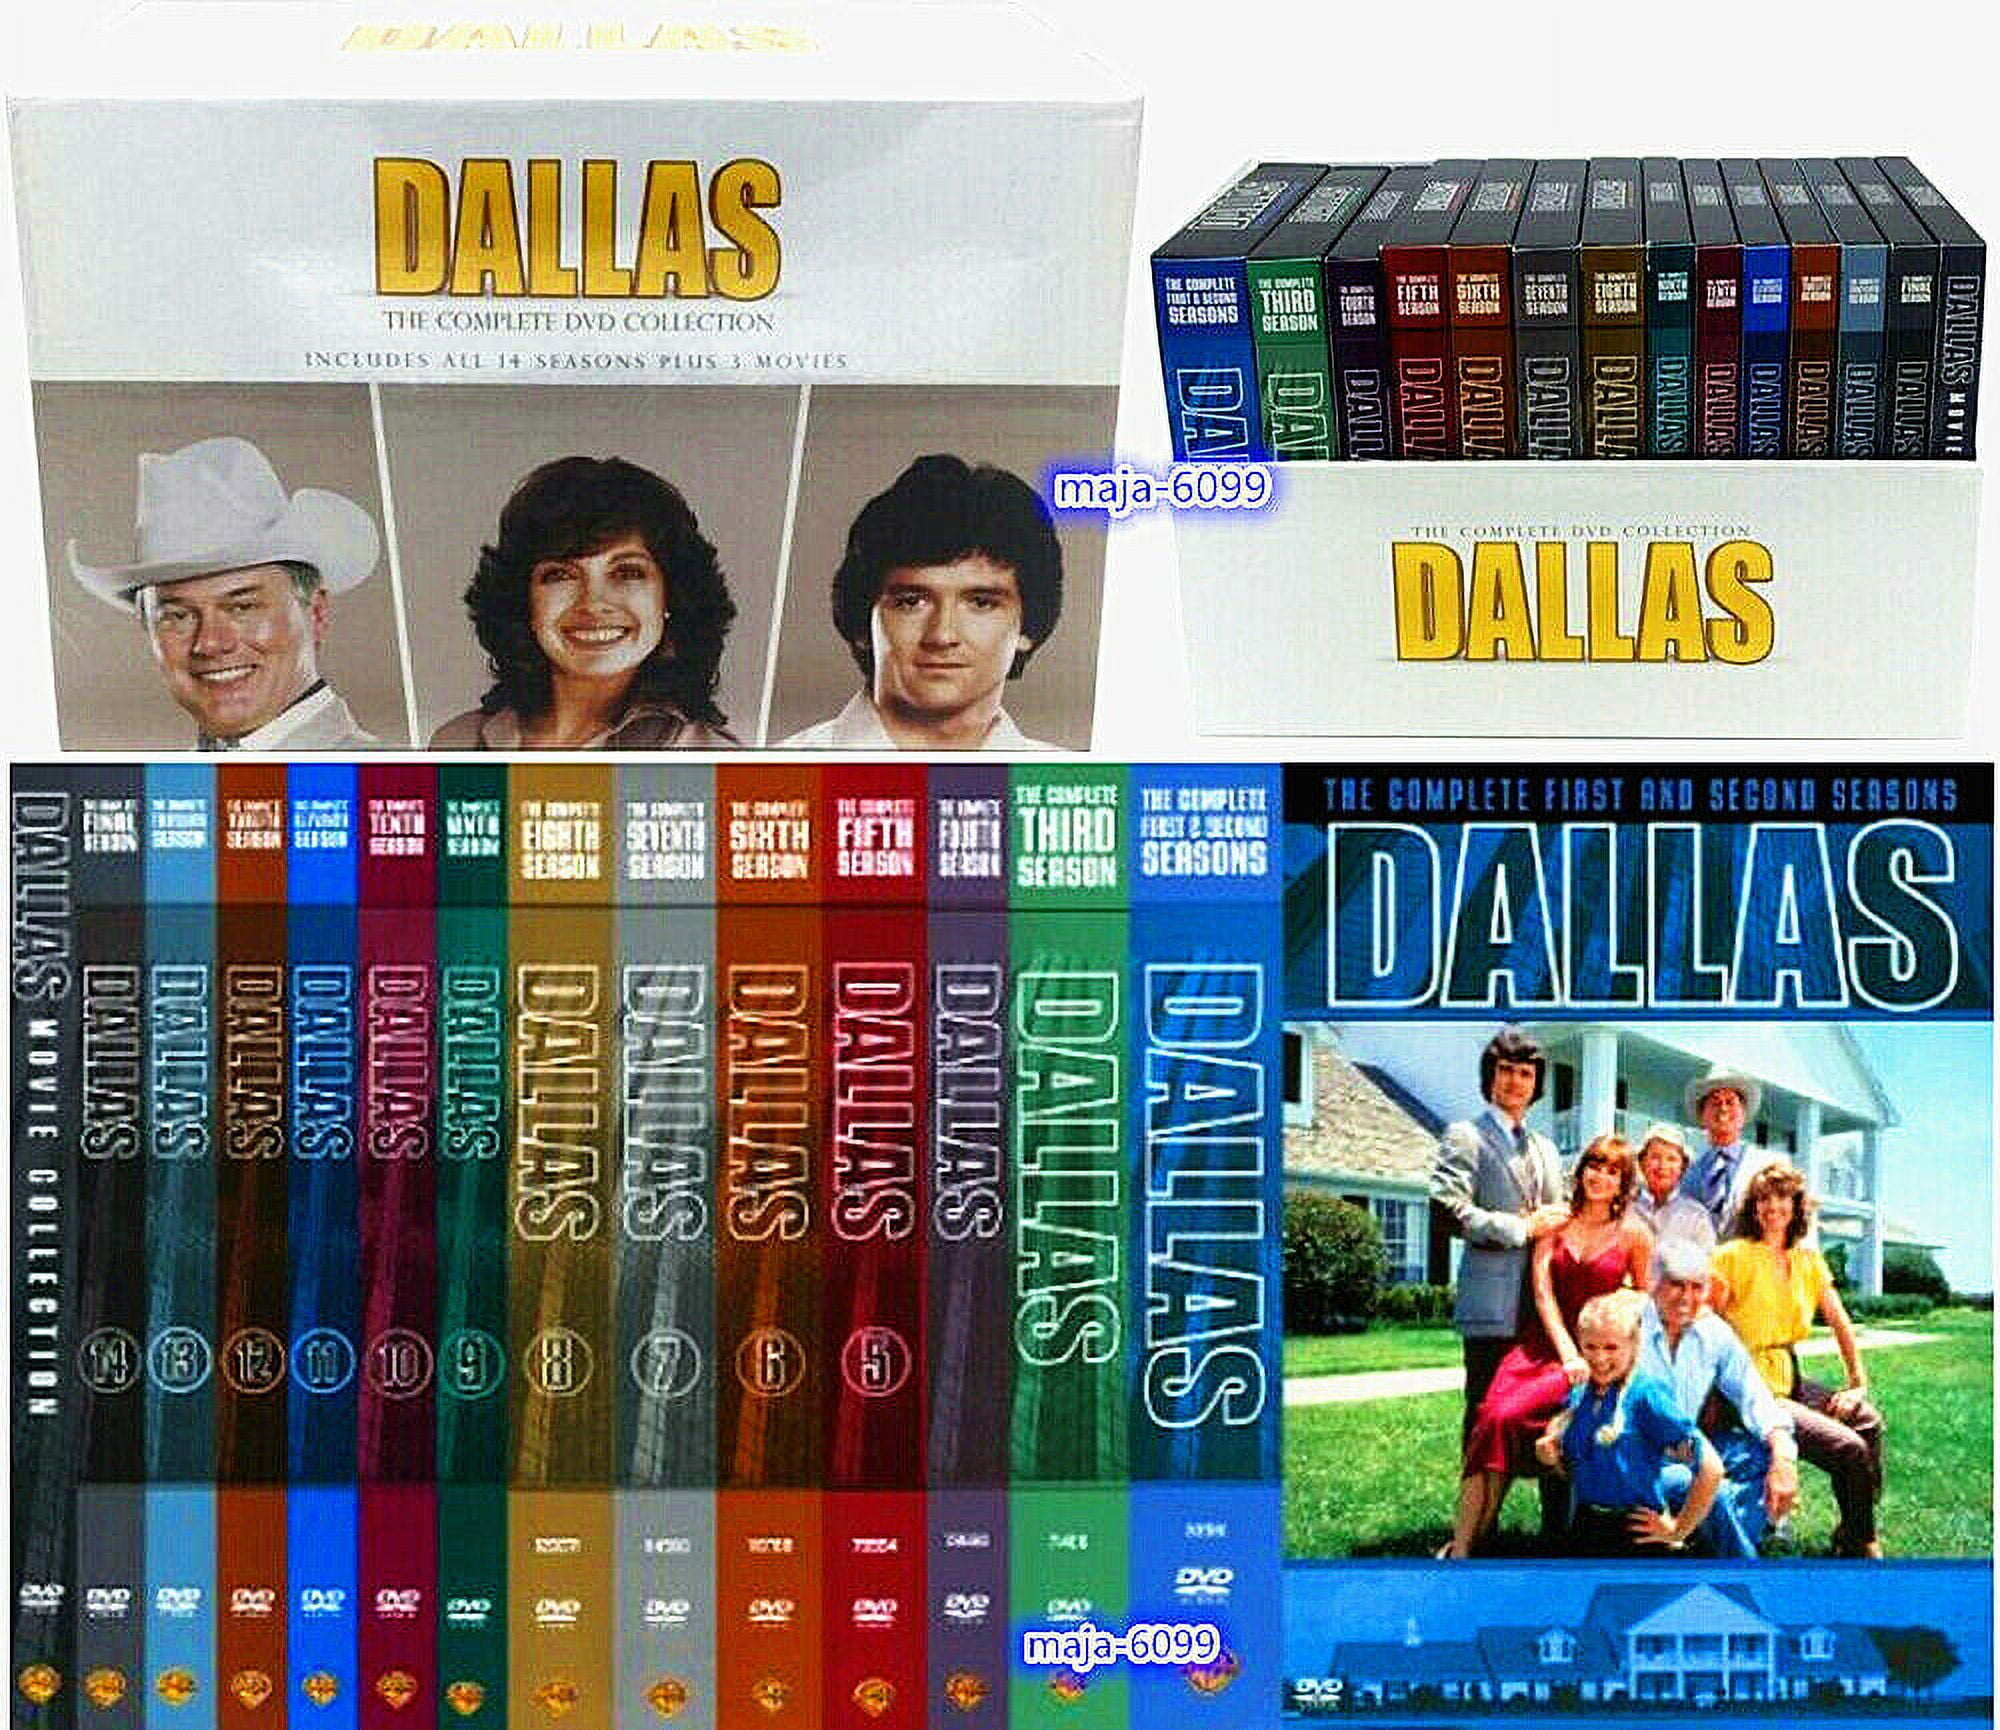 Dallas: The Complete Collection (Seasons 1-14 + 3 Movies